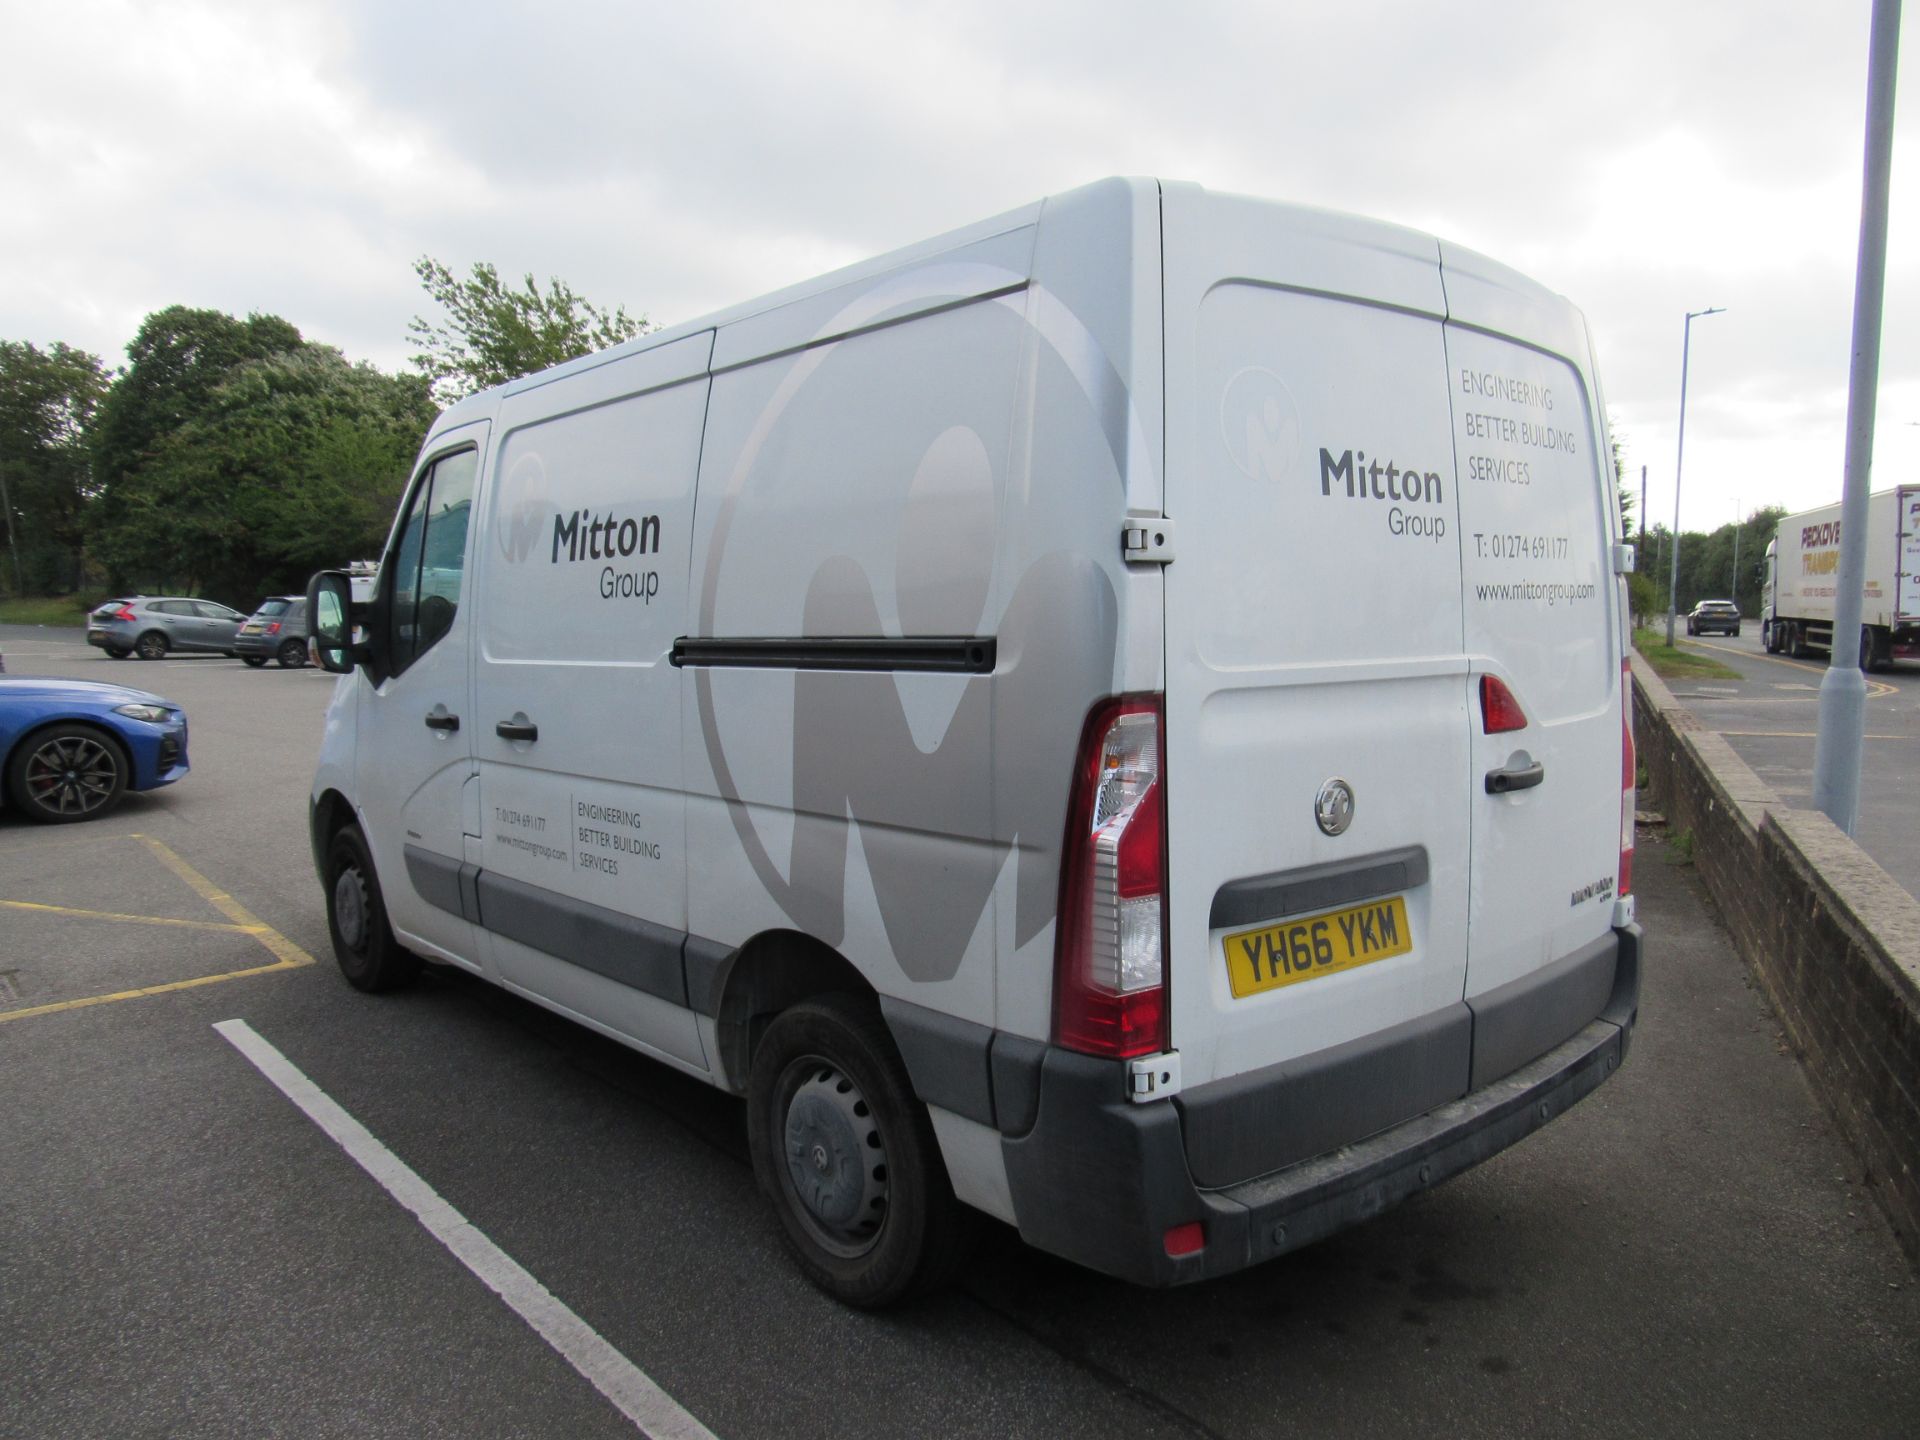 Vauxhall Movano CDTI F2800 Van, Registration YH66 YKM, 312,887 miles, Diesel, First Registered - Image 5 of 11